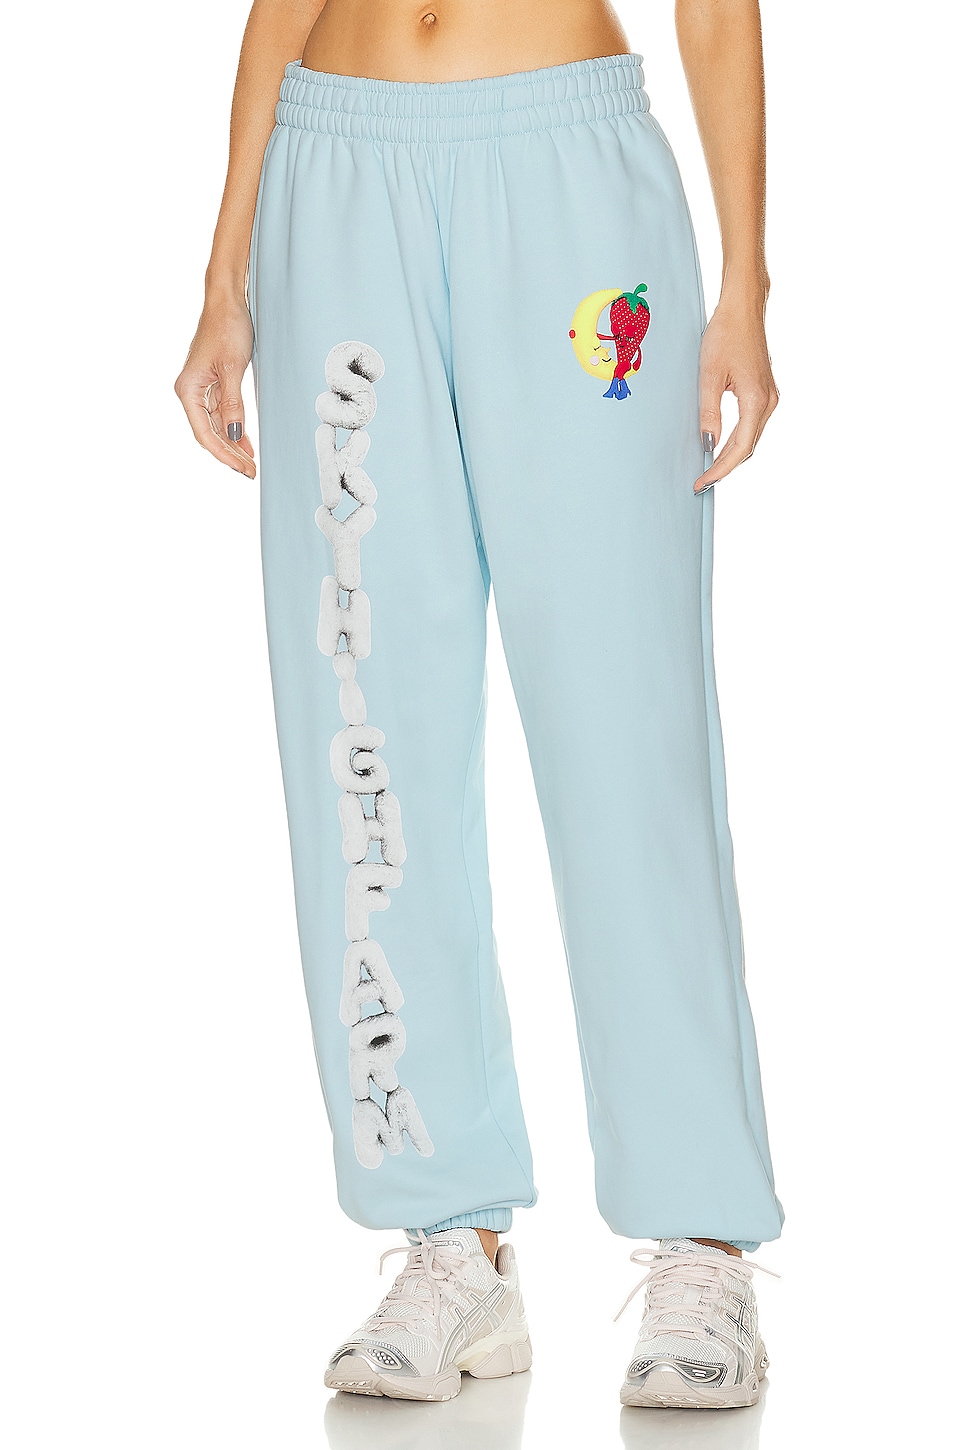 Image 1 of Sky High Farm Workwear Unisex Perennial Shana Graphic Pants Knit in BLUE